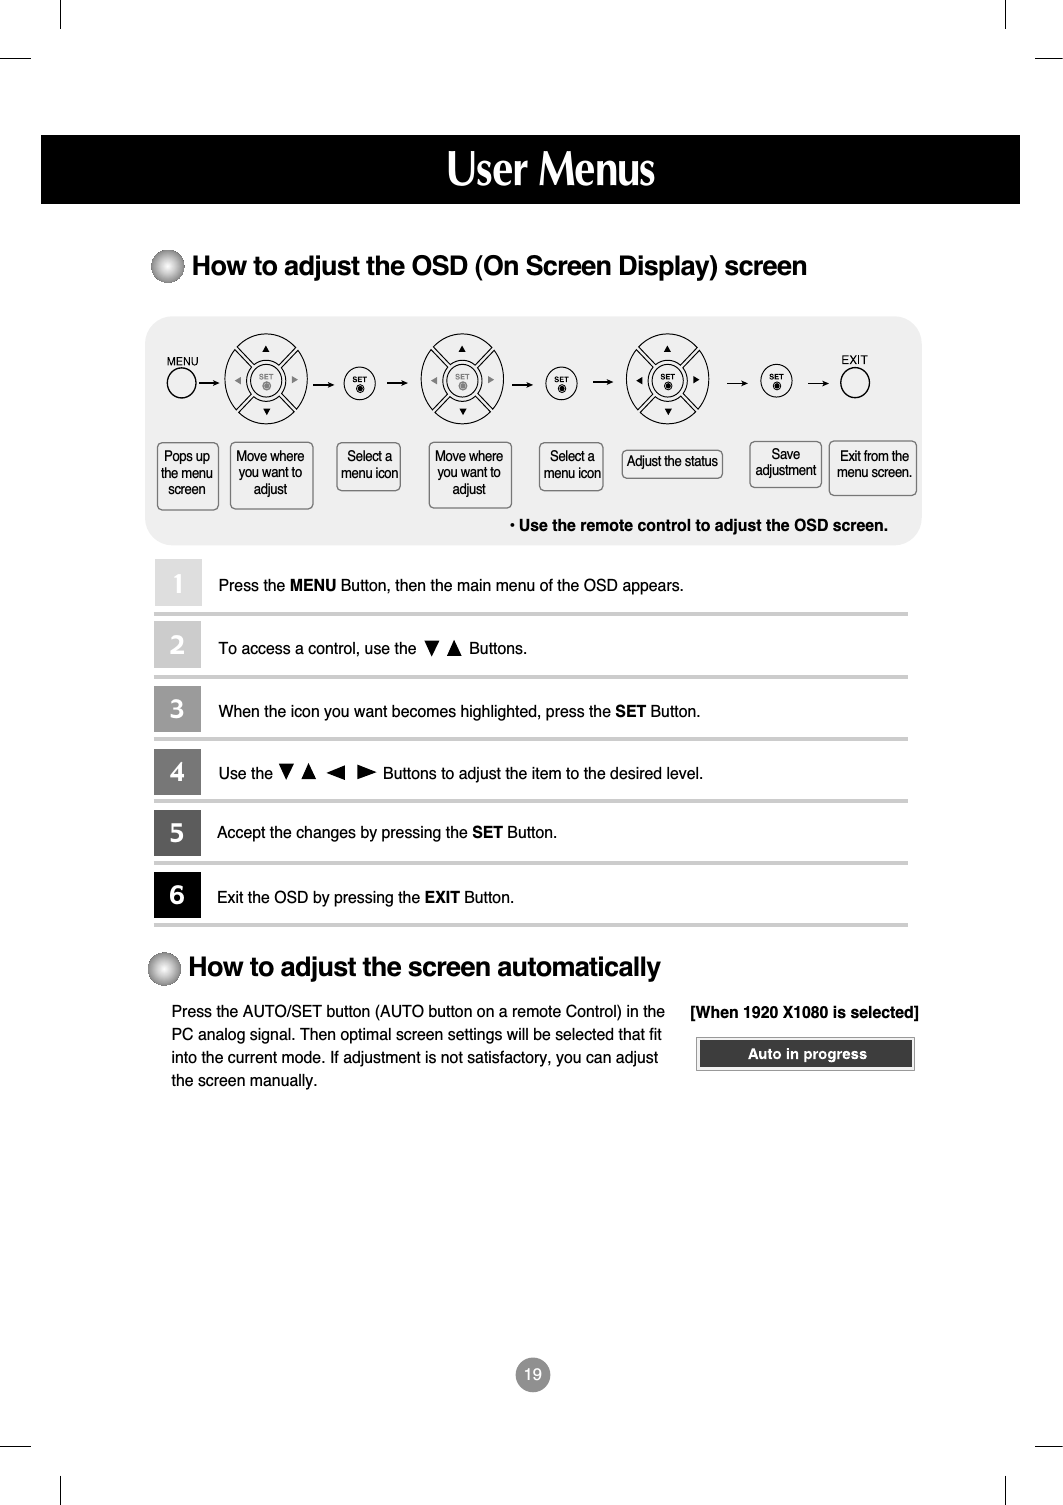 19How to adjust the OSD (On Screen Display) screen• Use the remote control to adjust the OSD screen.How to adjust the screen automaticallyPress the AUTO/SET button (AUTO button on a remote Control) in thePC analog signal. Then optimal screen settings will be selected that fitinto the current mode. If adjustment is not satisfactory, you can adjustthe screen manually.Press the MENU Button, then the main menu of the OSD appears.To access a control, use the            Buttons. When the icon you want becomes highlighted, press the SET Button.Use the                         Buttons to adjust the item to the desired level.Accept the changes by pressing the SET Button.Exit the OSD by pressing the EXIT Button.123456Pops upthe menuscreenMove whereyou want toadjustMove whereyou want toadjustSelect amenu iconSelect amenu icon Adjust the status SaveadjustmentExit from themenu screen.User Menus[When 1920 X1080 is selected]